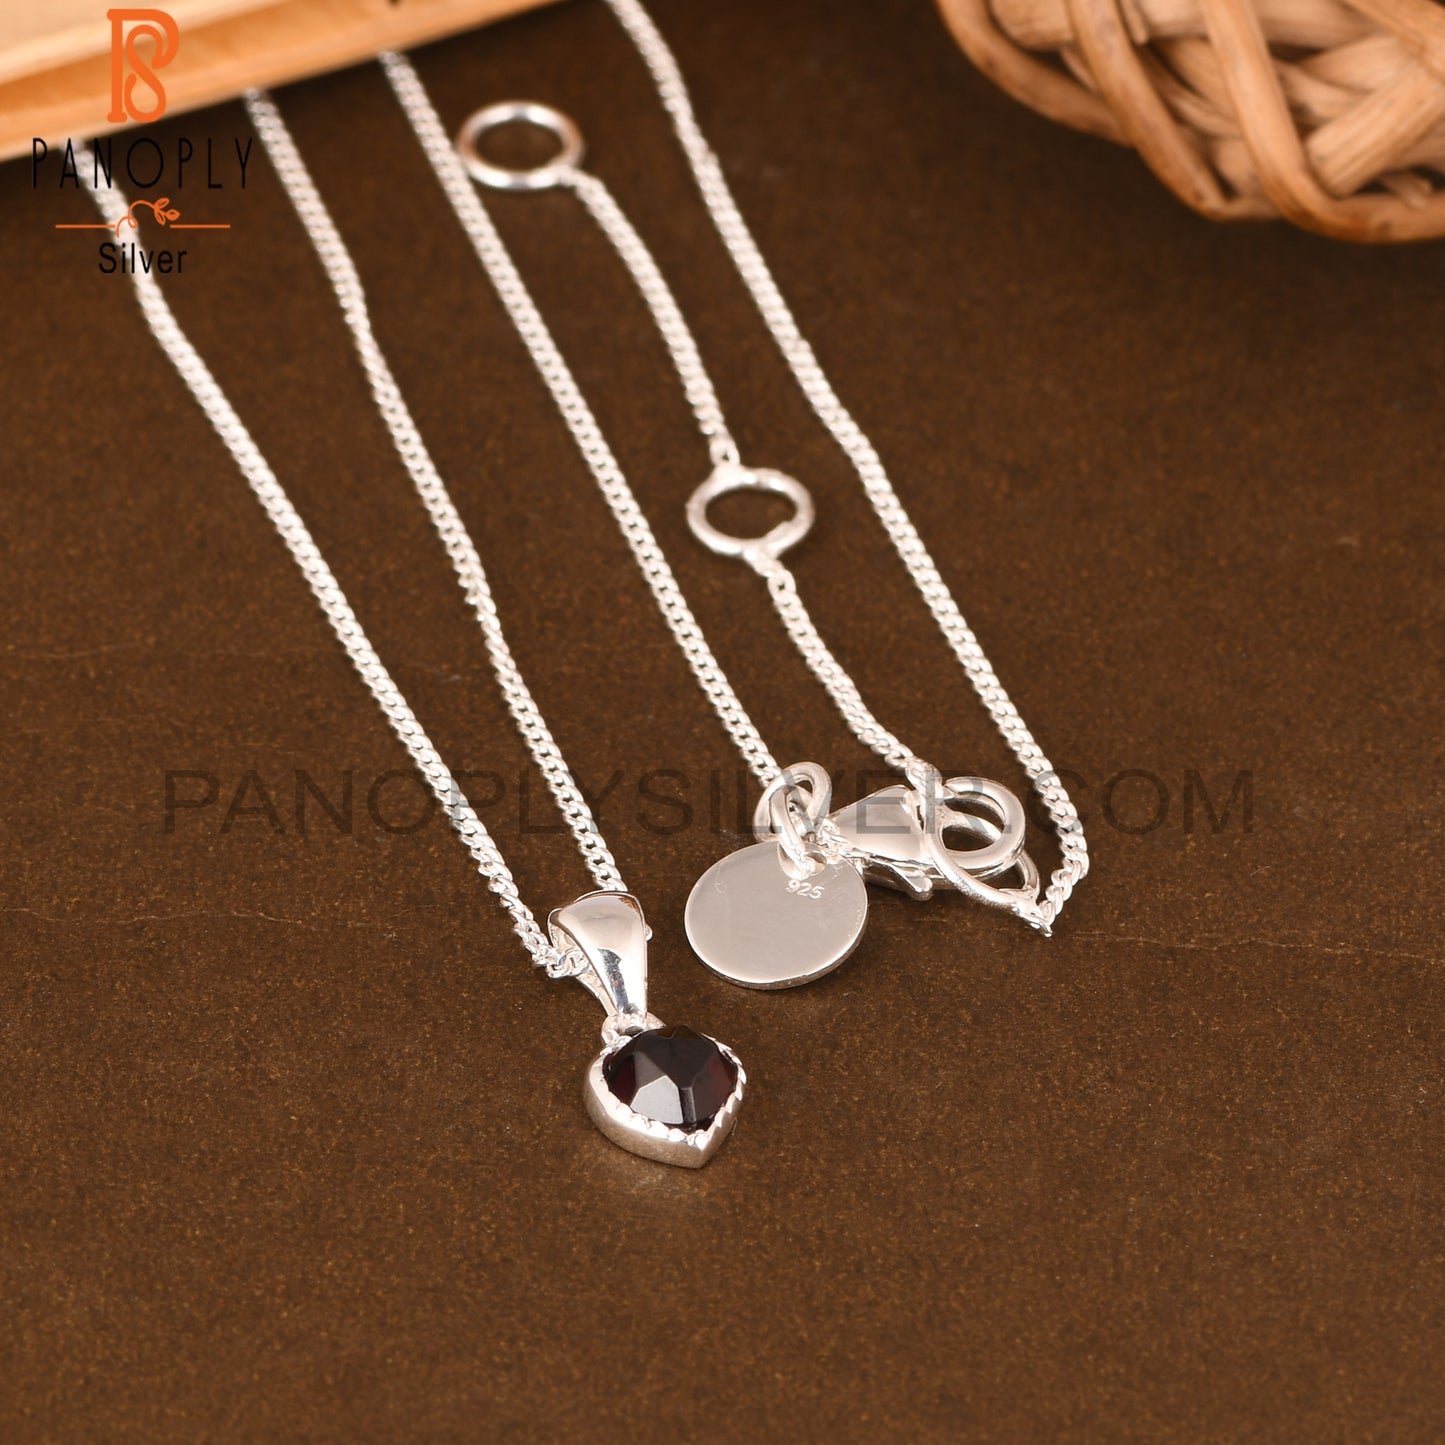 Garnet Heart 925 Sterling Silver Pendant And Chain